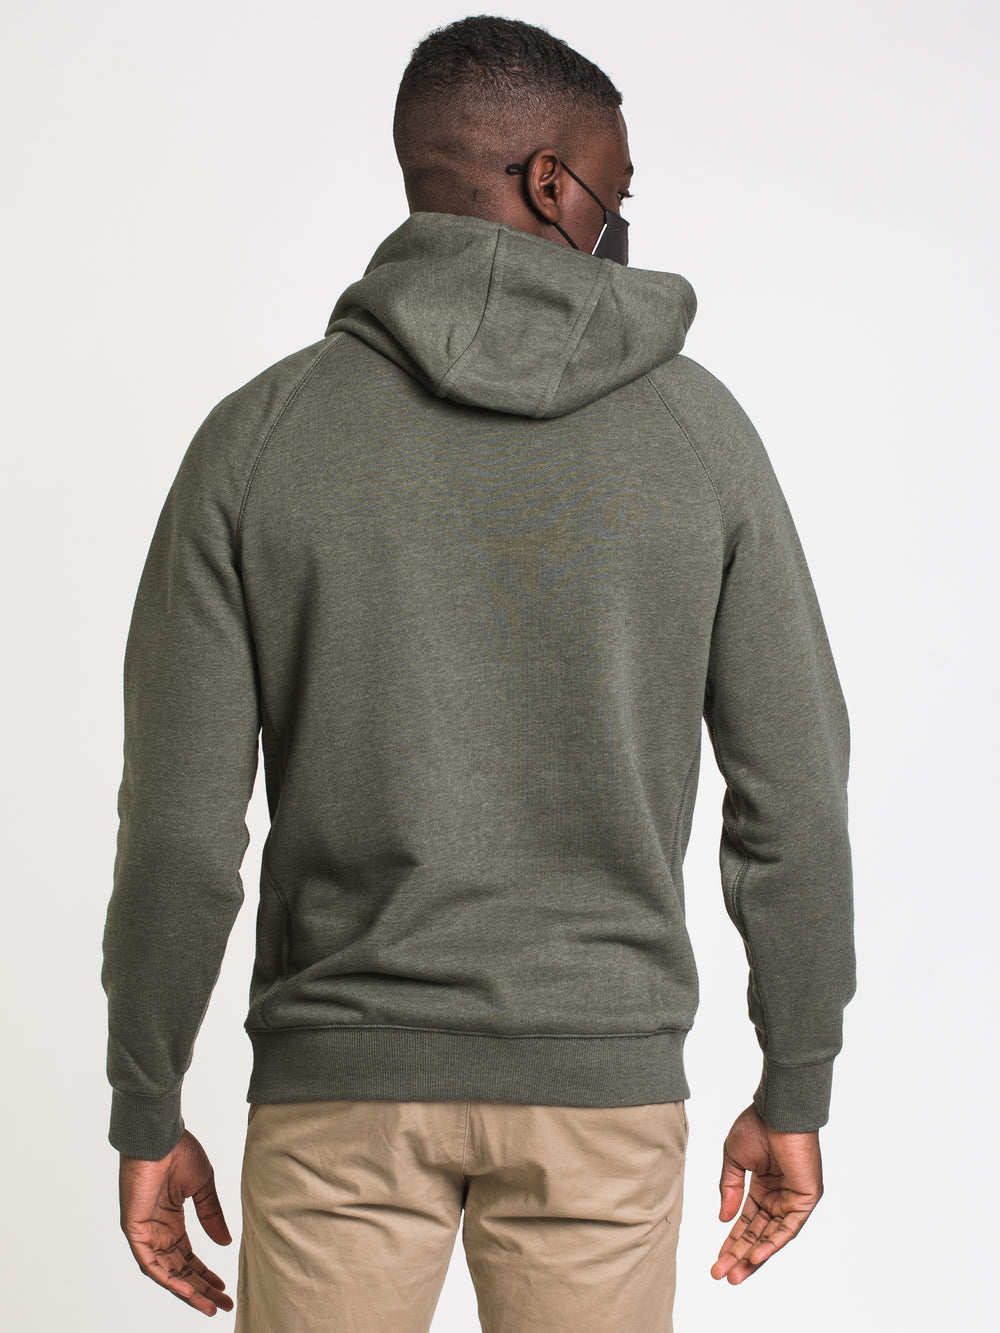 CARHARTT MIDWEIGHT LOGO GRAPHIC HOODIE - CLEARANCE